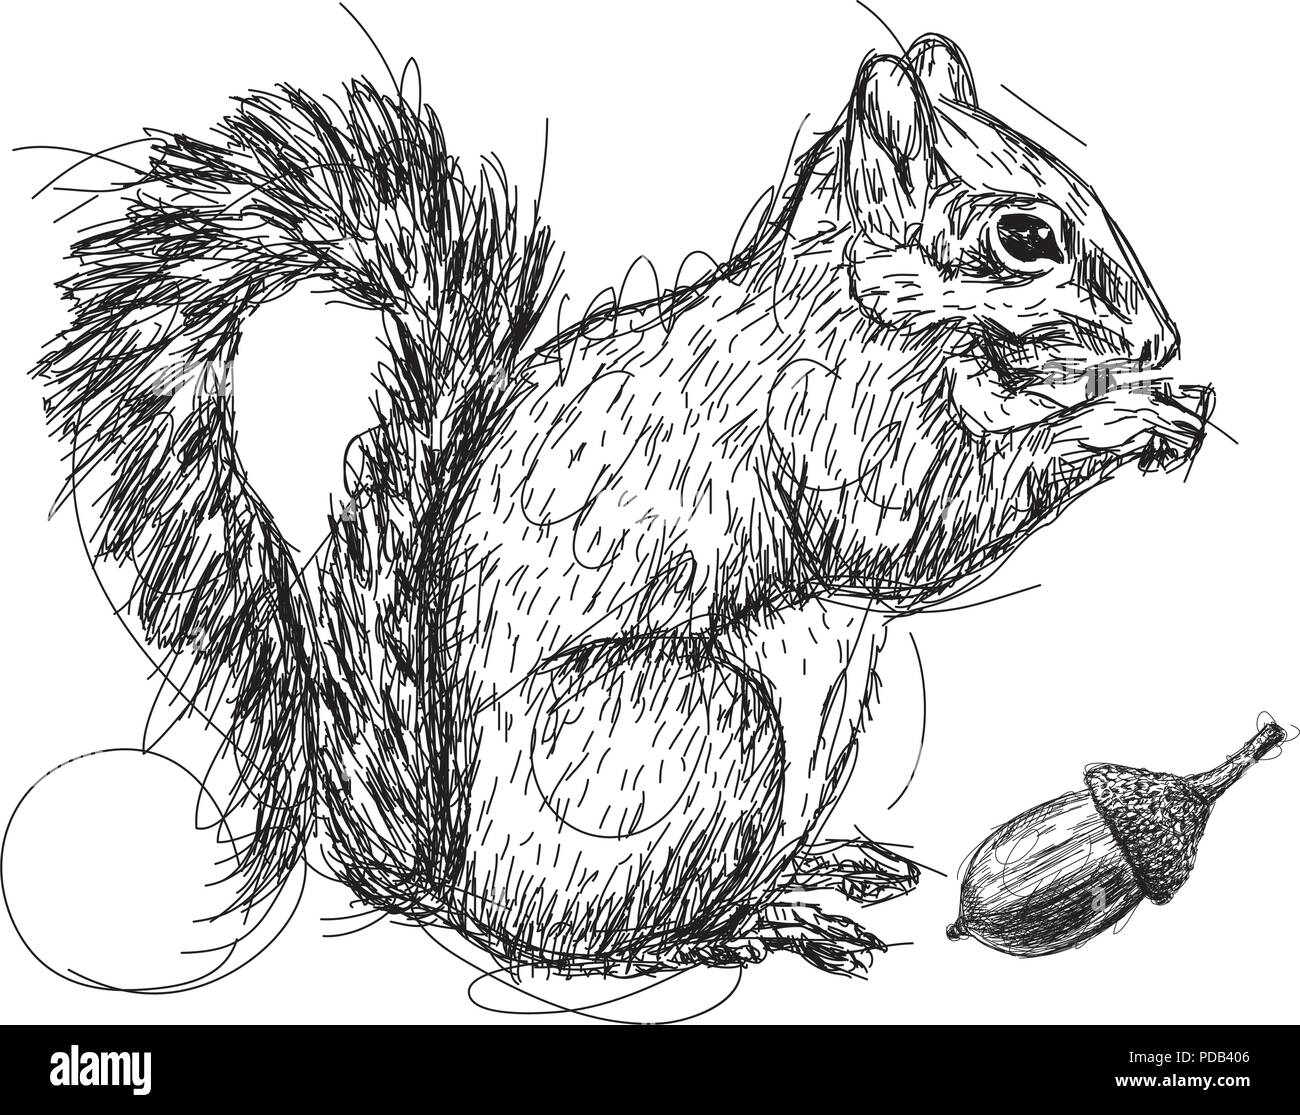 How To Draw a Squirrel 🐿 YouTube Studio Sketch Tutorial - YouTube